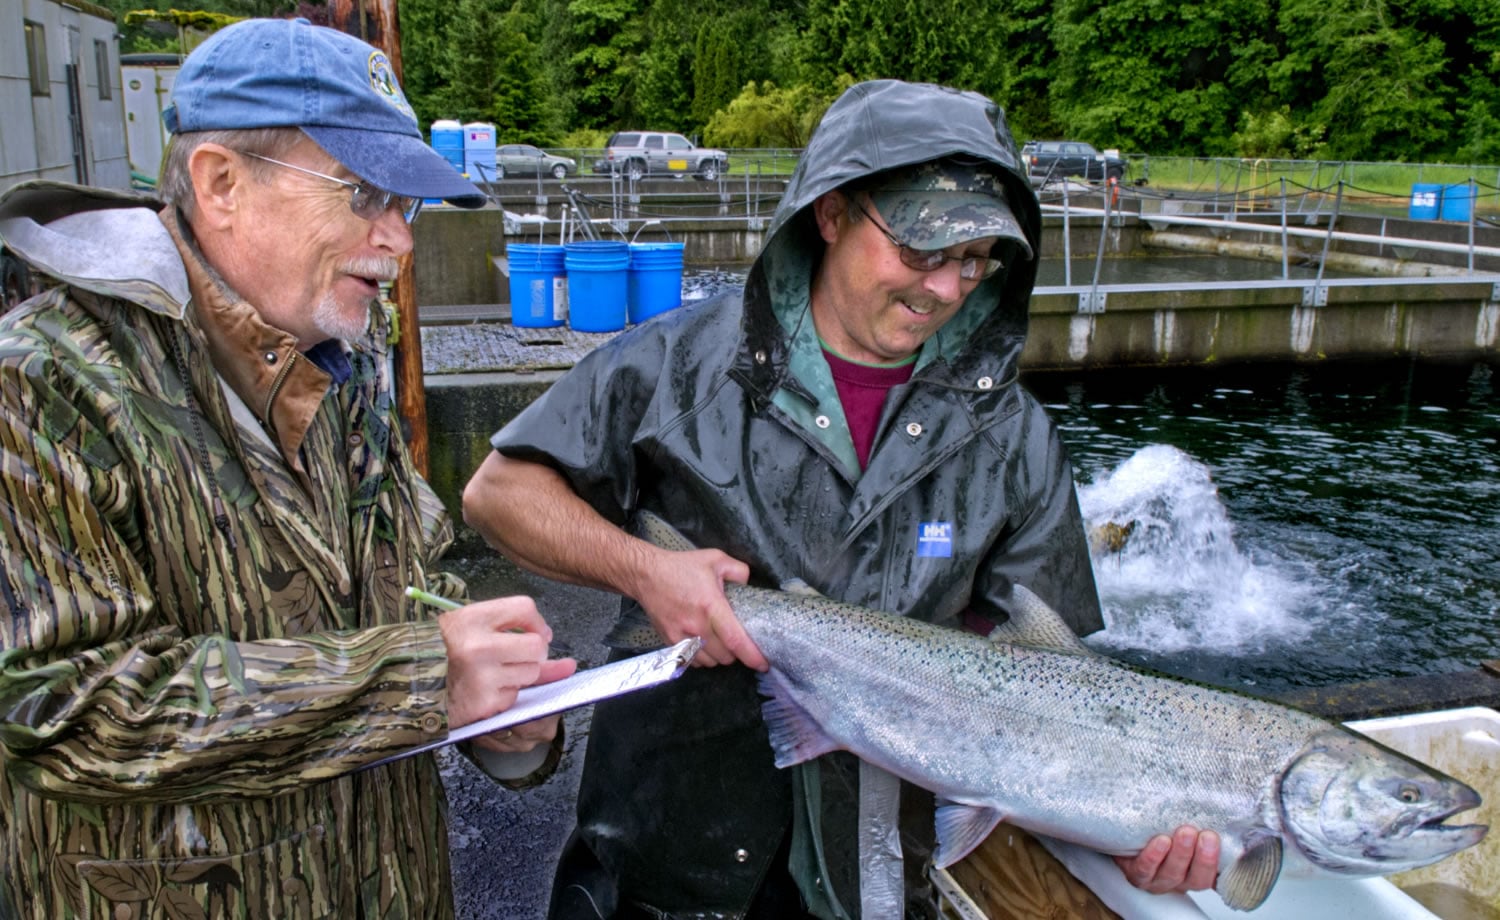 Hal Mahnke, left, and Shawn Collins, assistant manager at Kalama Falls Hatchery, admire a wild spring chinook salmon.